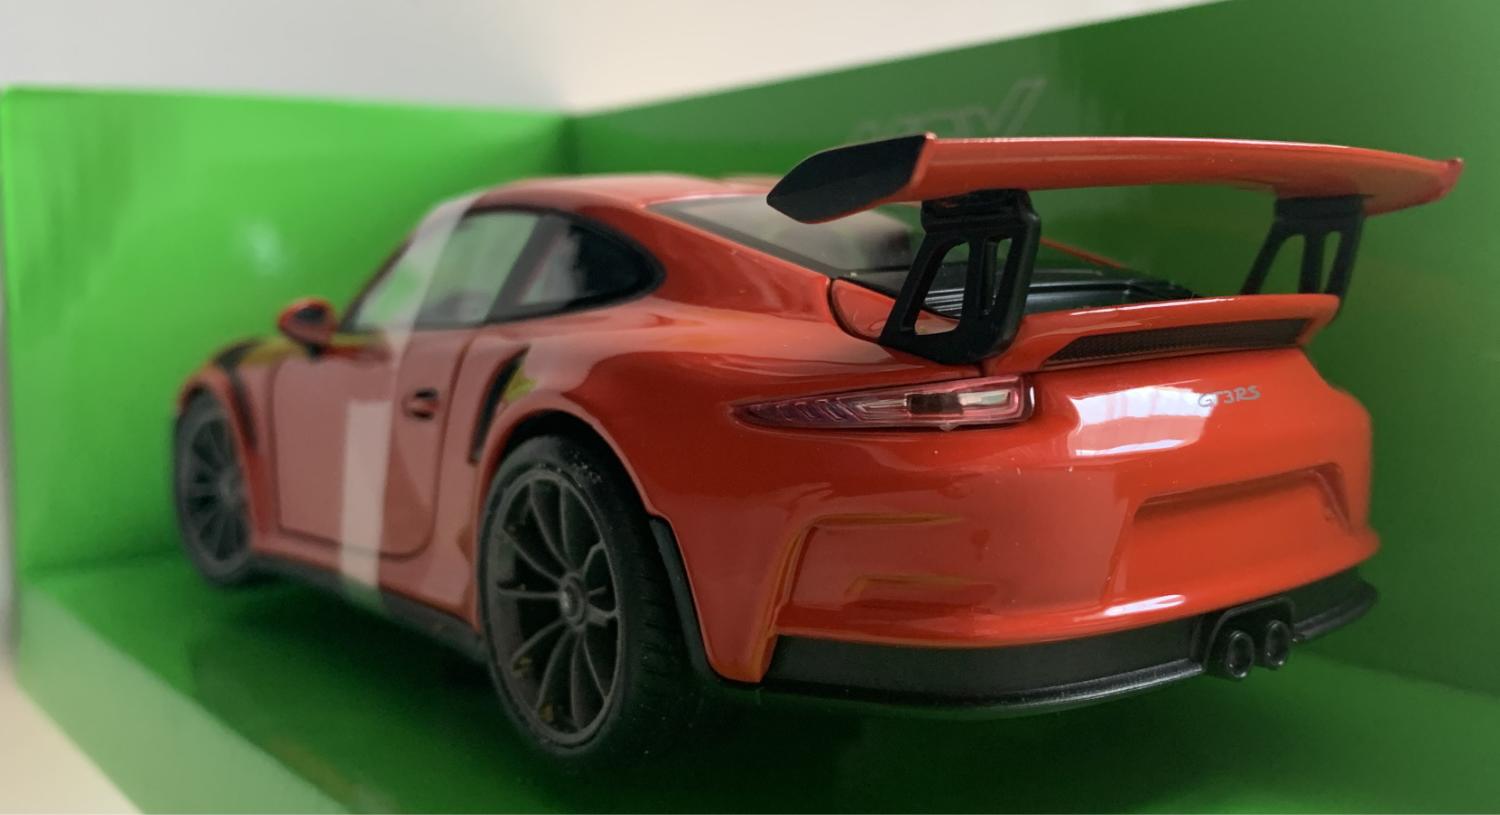 Porsche 911 GT3 RS in Orange 2016, 1:24 scale diecast model from Welly